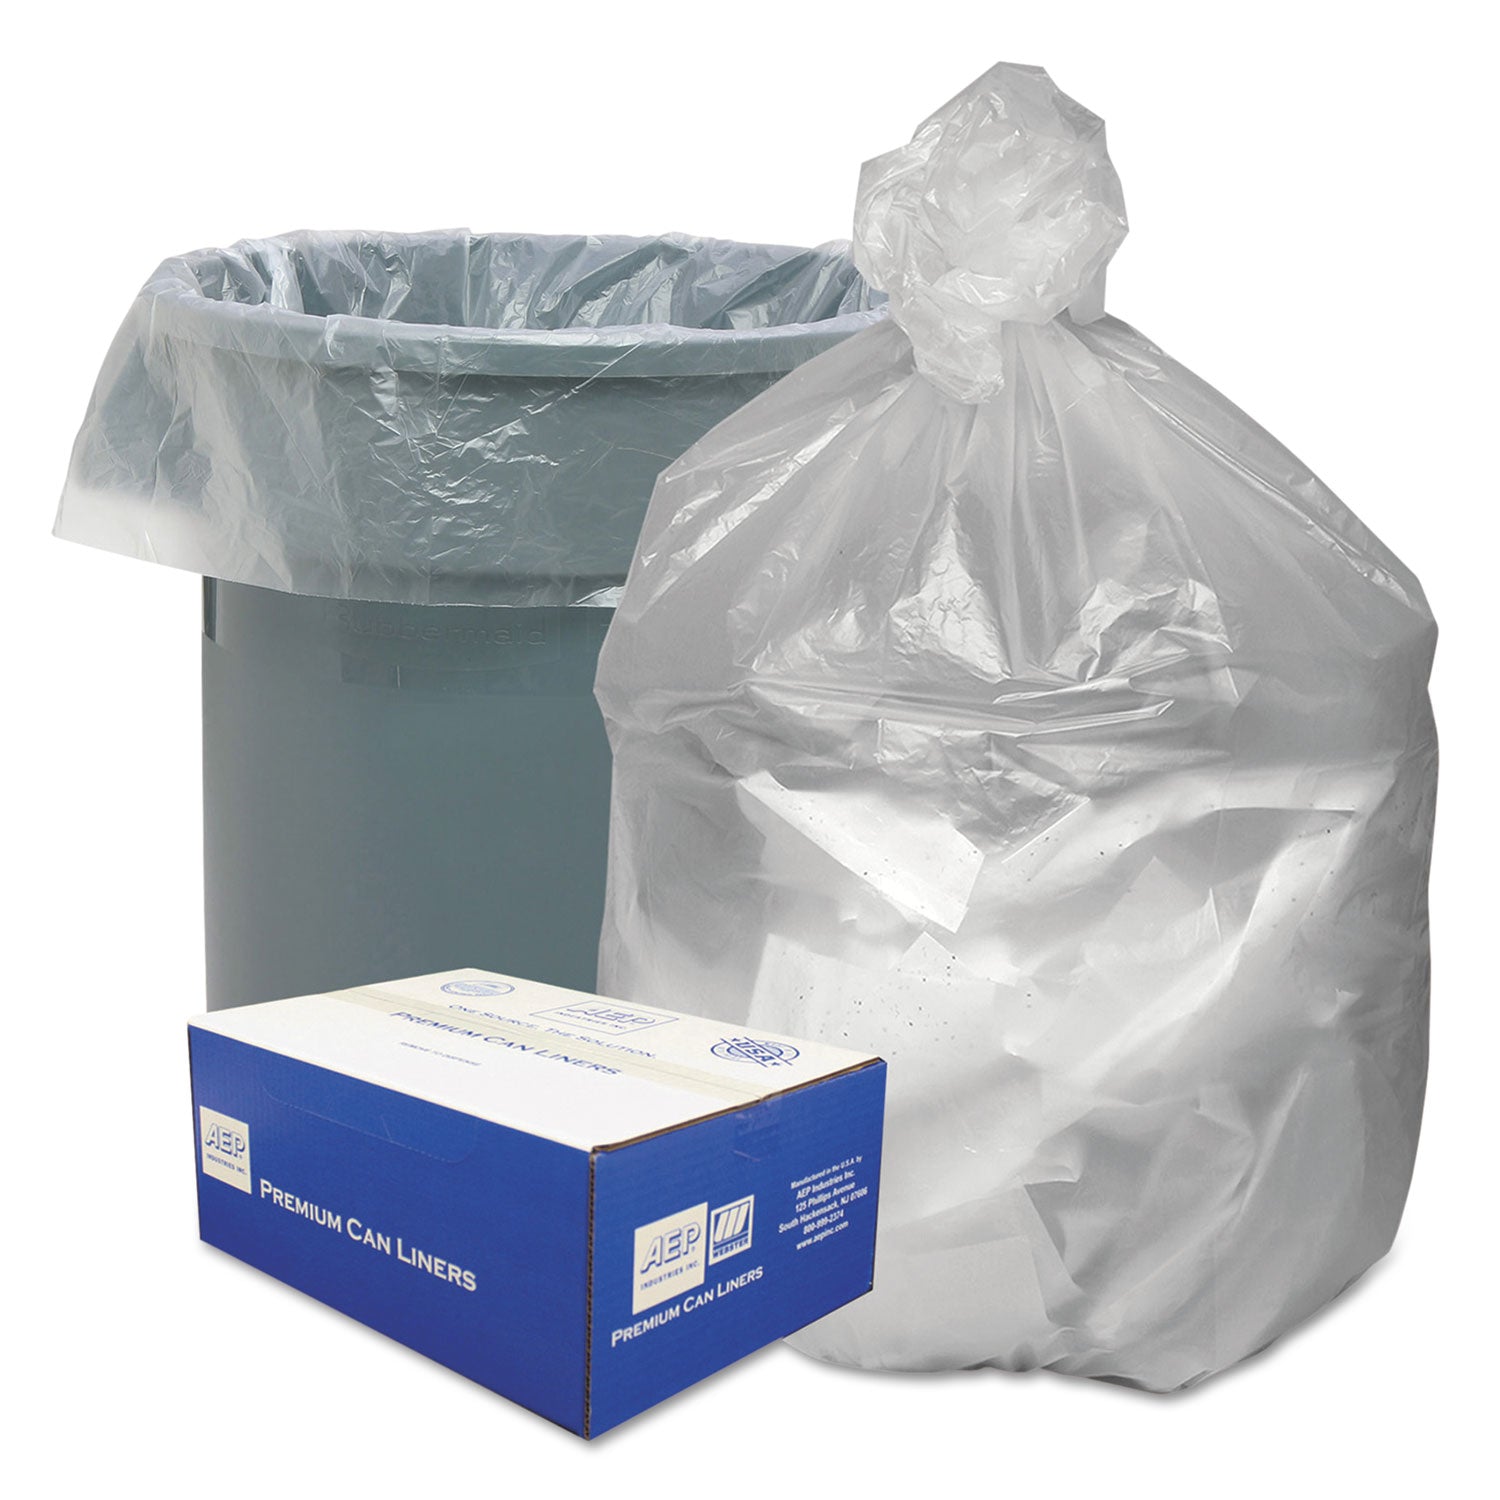 waste-can-liners-45-gal-10-mic-40-x-46-natural-25-bags-roll-10-rolls-carton_wbignt4048 - 1